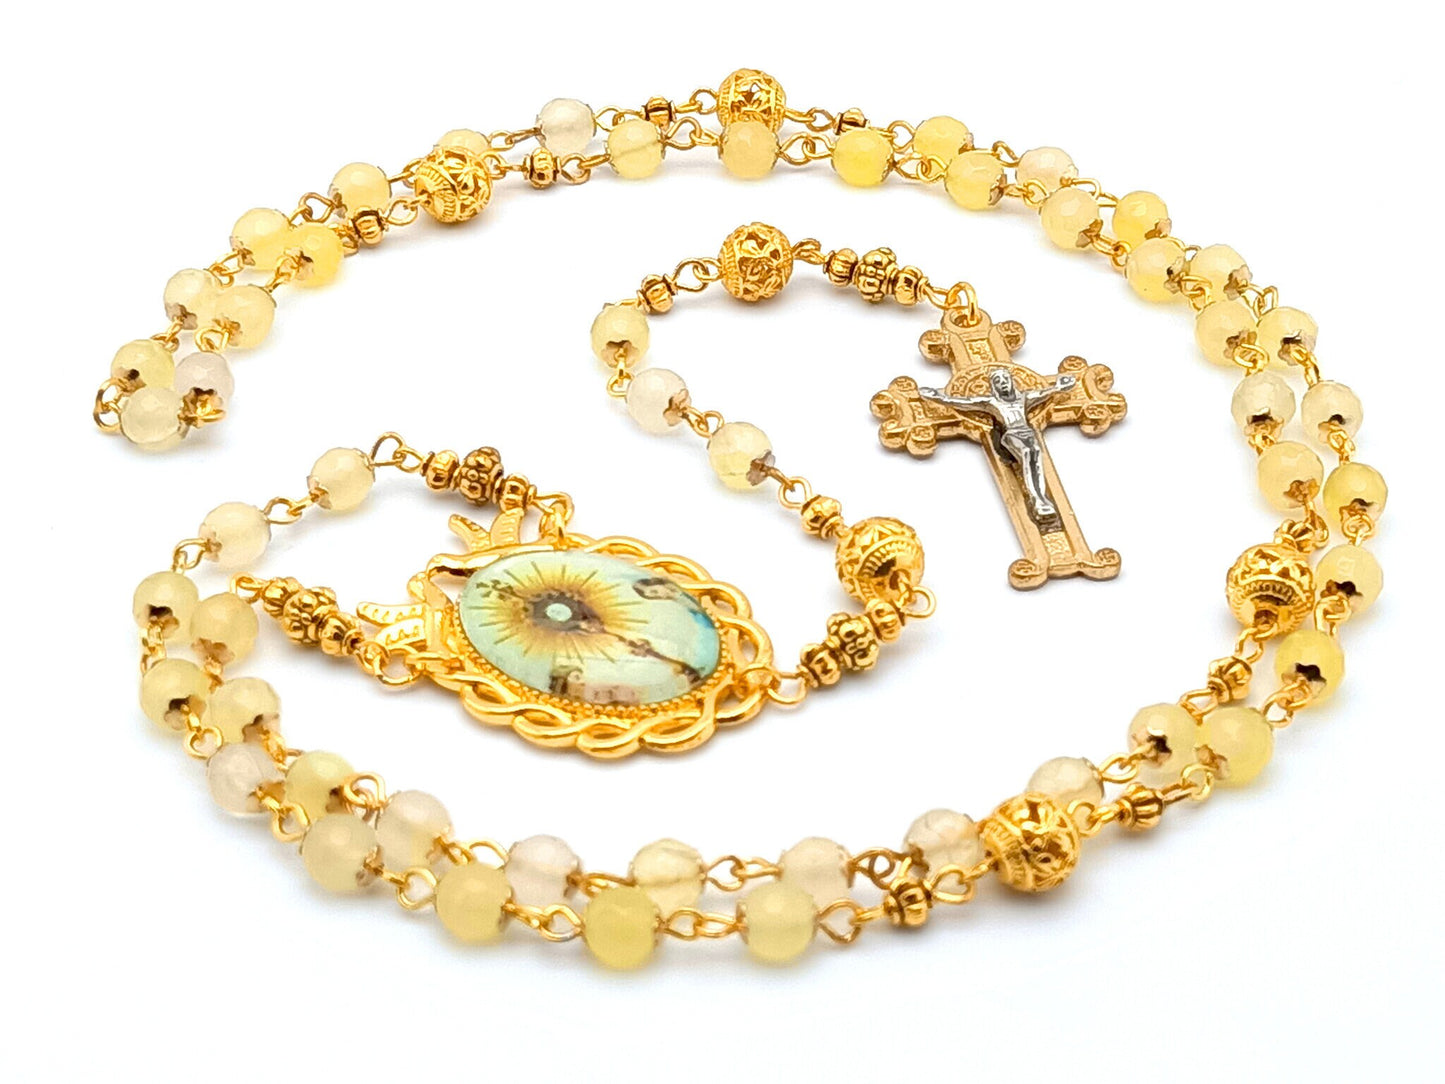 Blessed Sacrament unique rosary beads with yellow agate and golden beads, golden crucifix and picture centre medal.